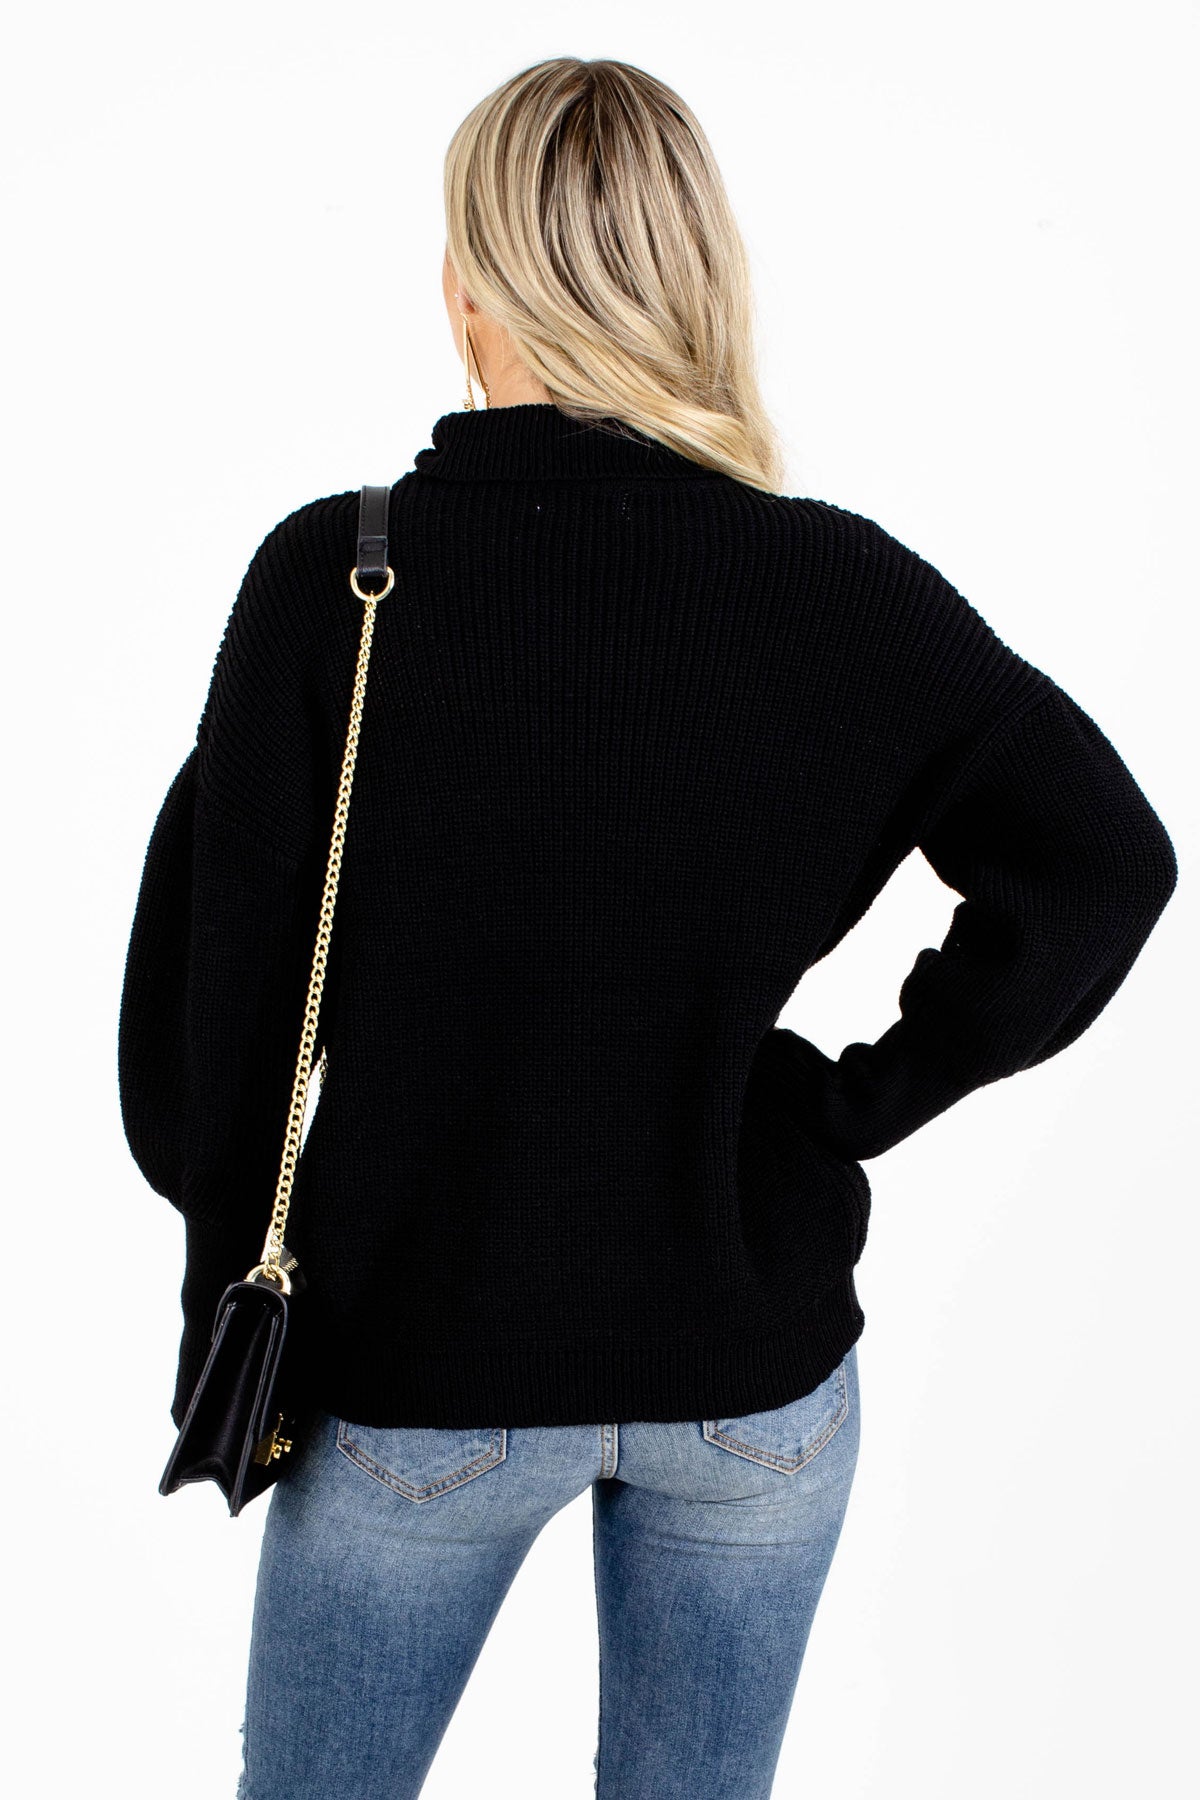 Women's Black Business Casual Boutique Sweater